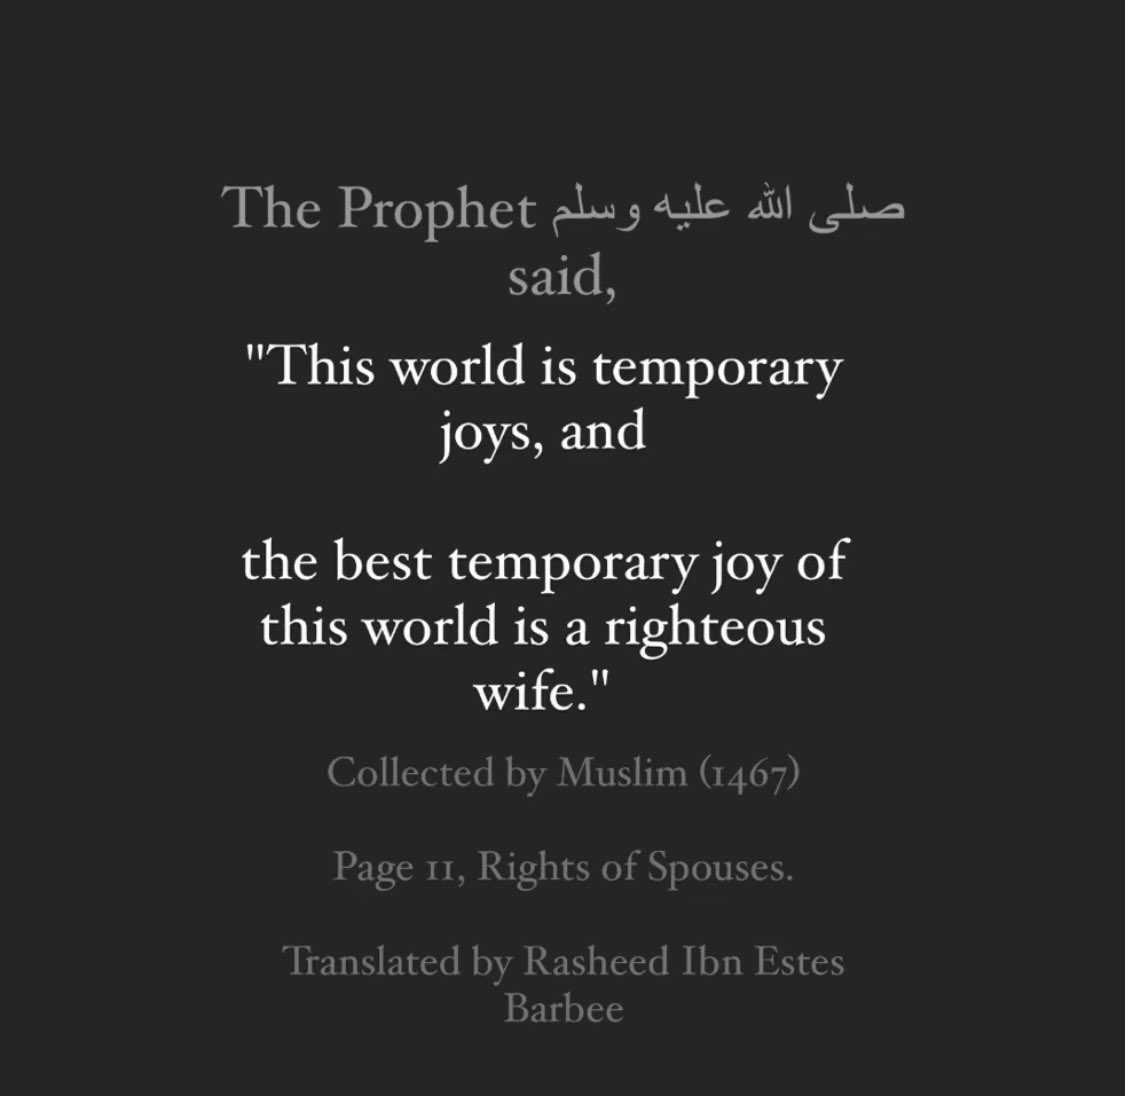 A righteous wife>>>any materialistic thing in the world